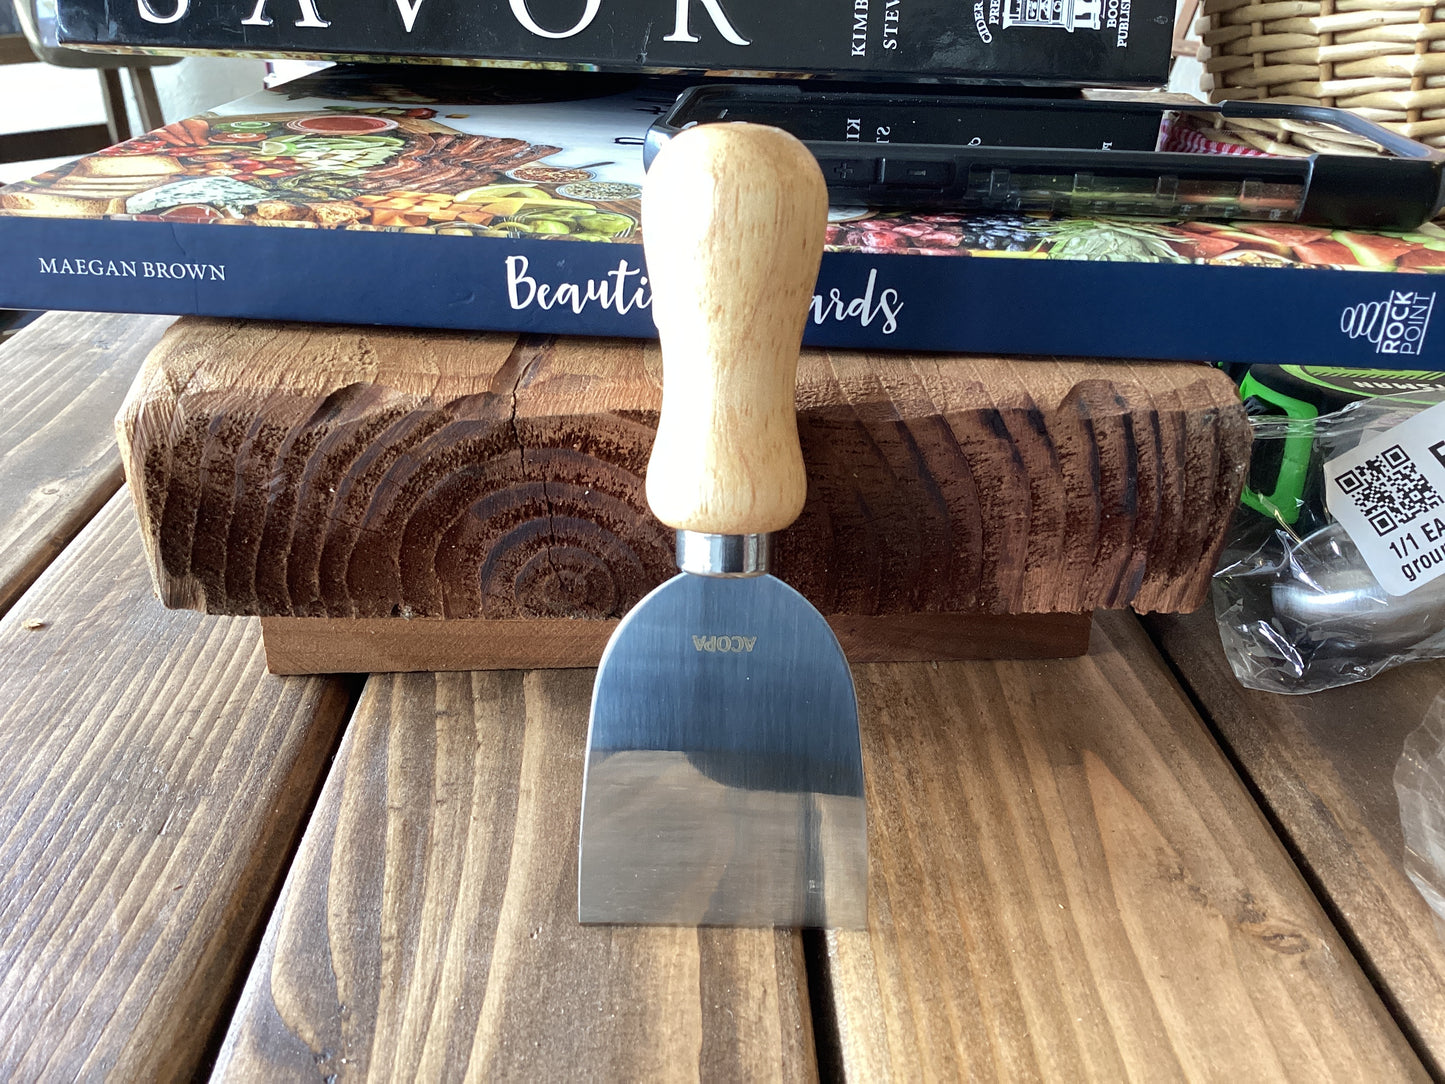 Small wide cheese knife w/ wood handle